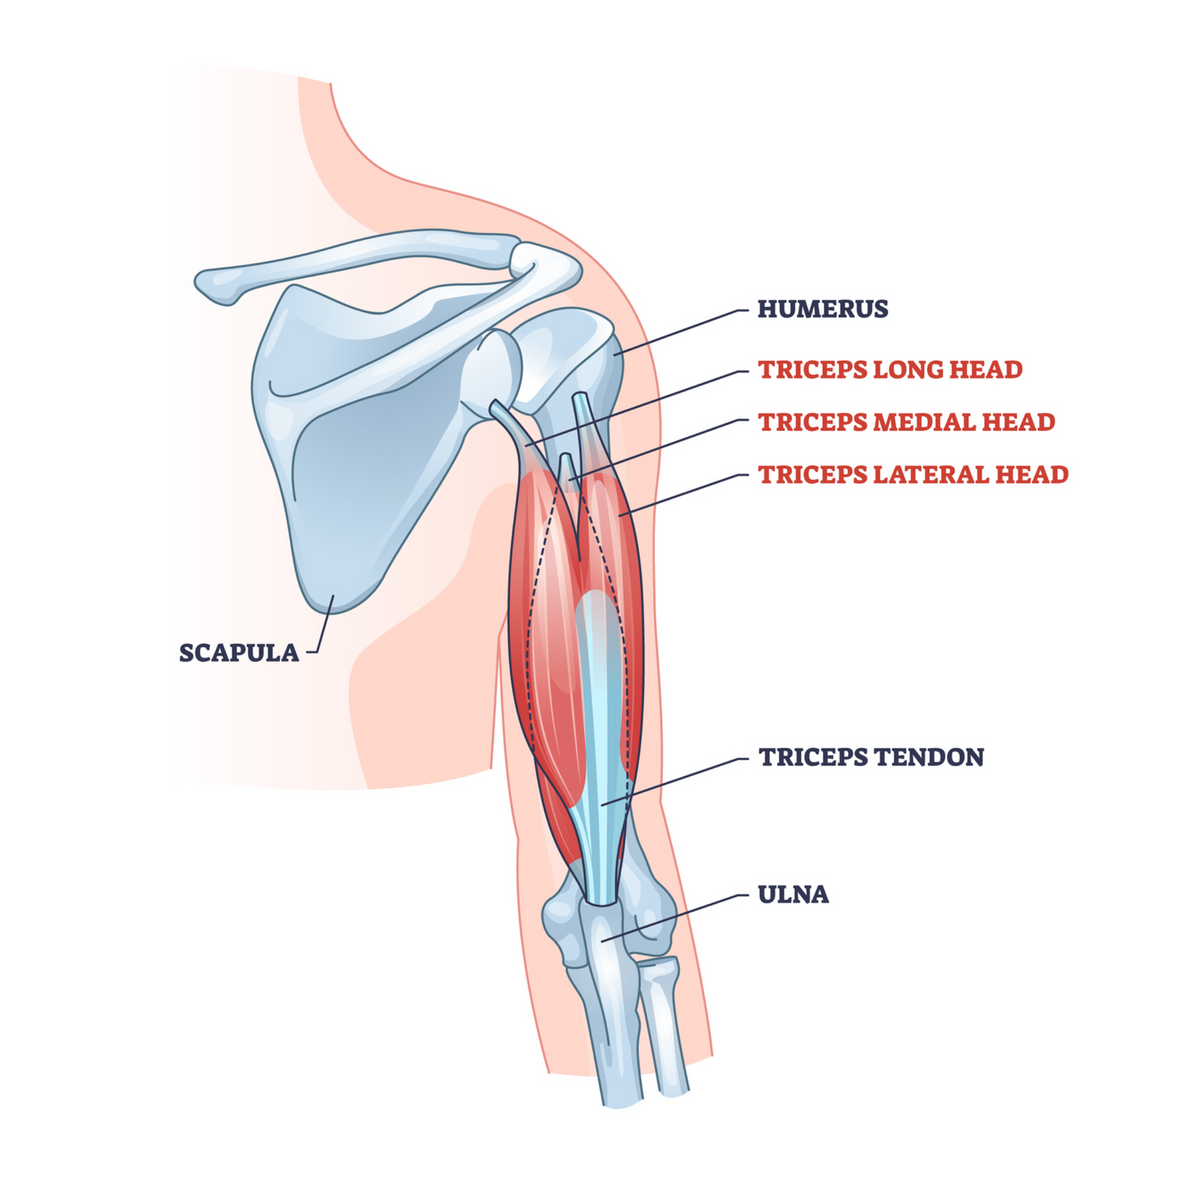 Triceps muscle anatomy. The triceps muscles are located at the